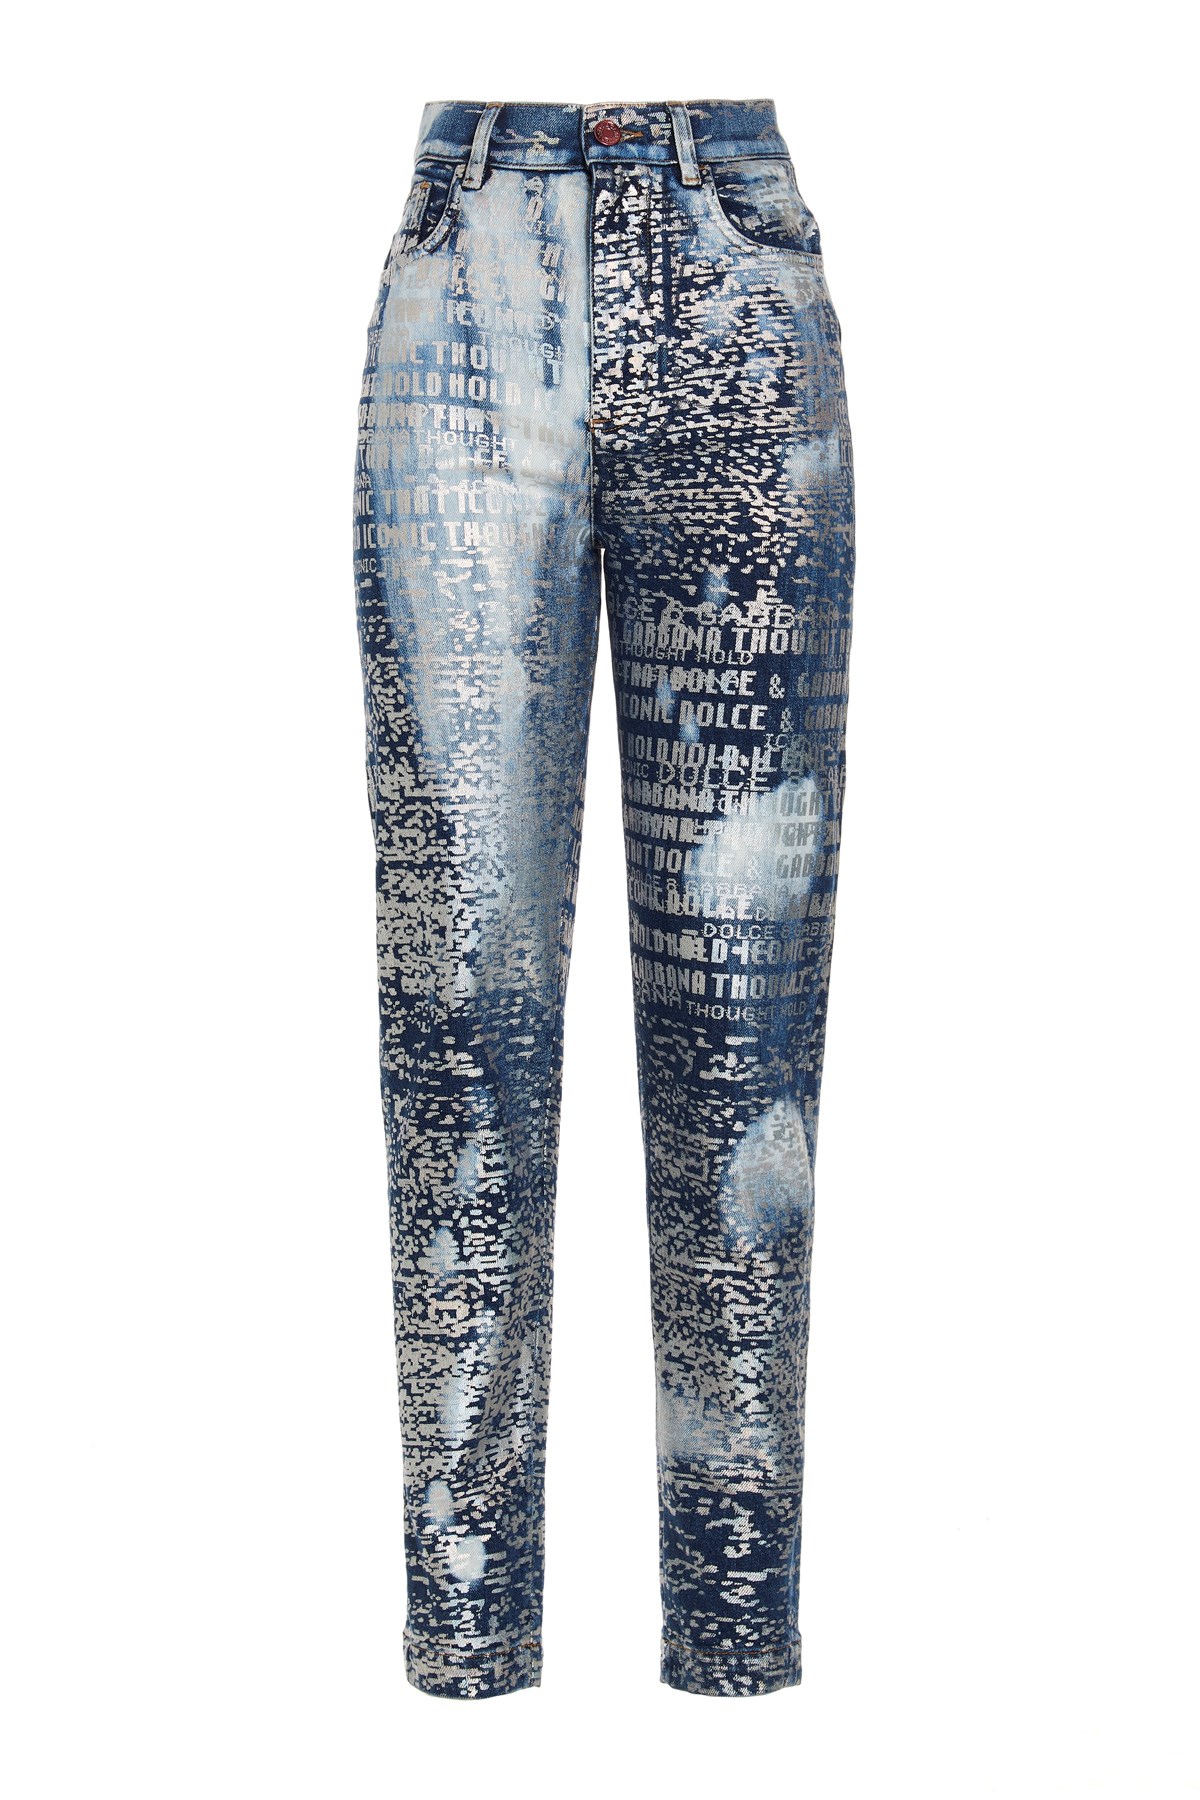 DOLCE & GABBANA All Over Print Jeans